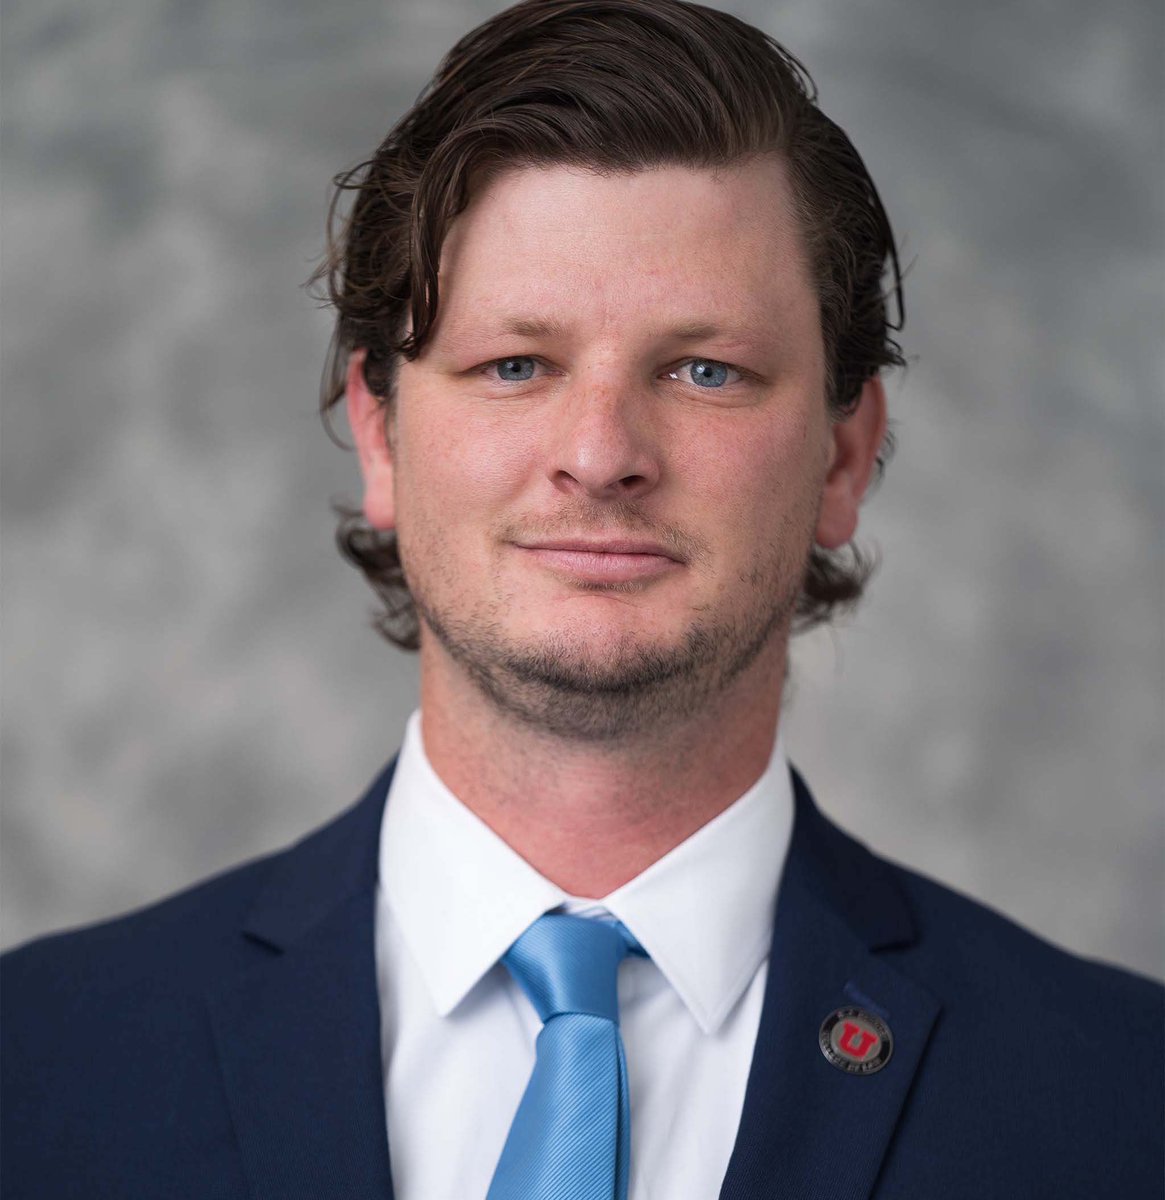 In honor of Veteran’s Day today, we’re proud to highlight 3L Michael Meszaros, who received the University of Utah Student Veteran of the Year award for his pro bono work with veterans. Read his story here: bit.ly/3MDJR1g